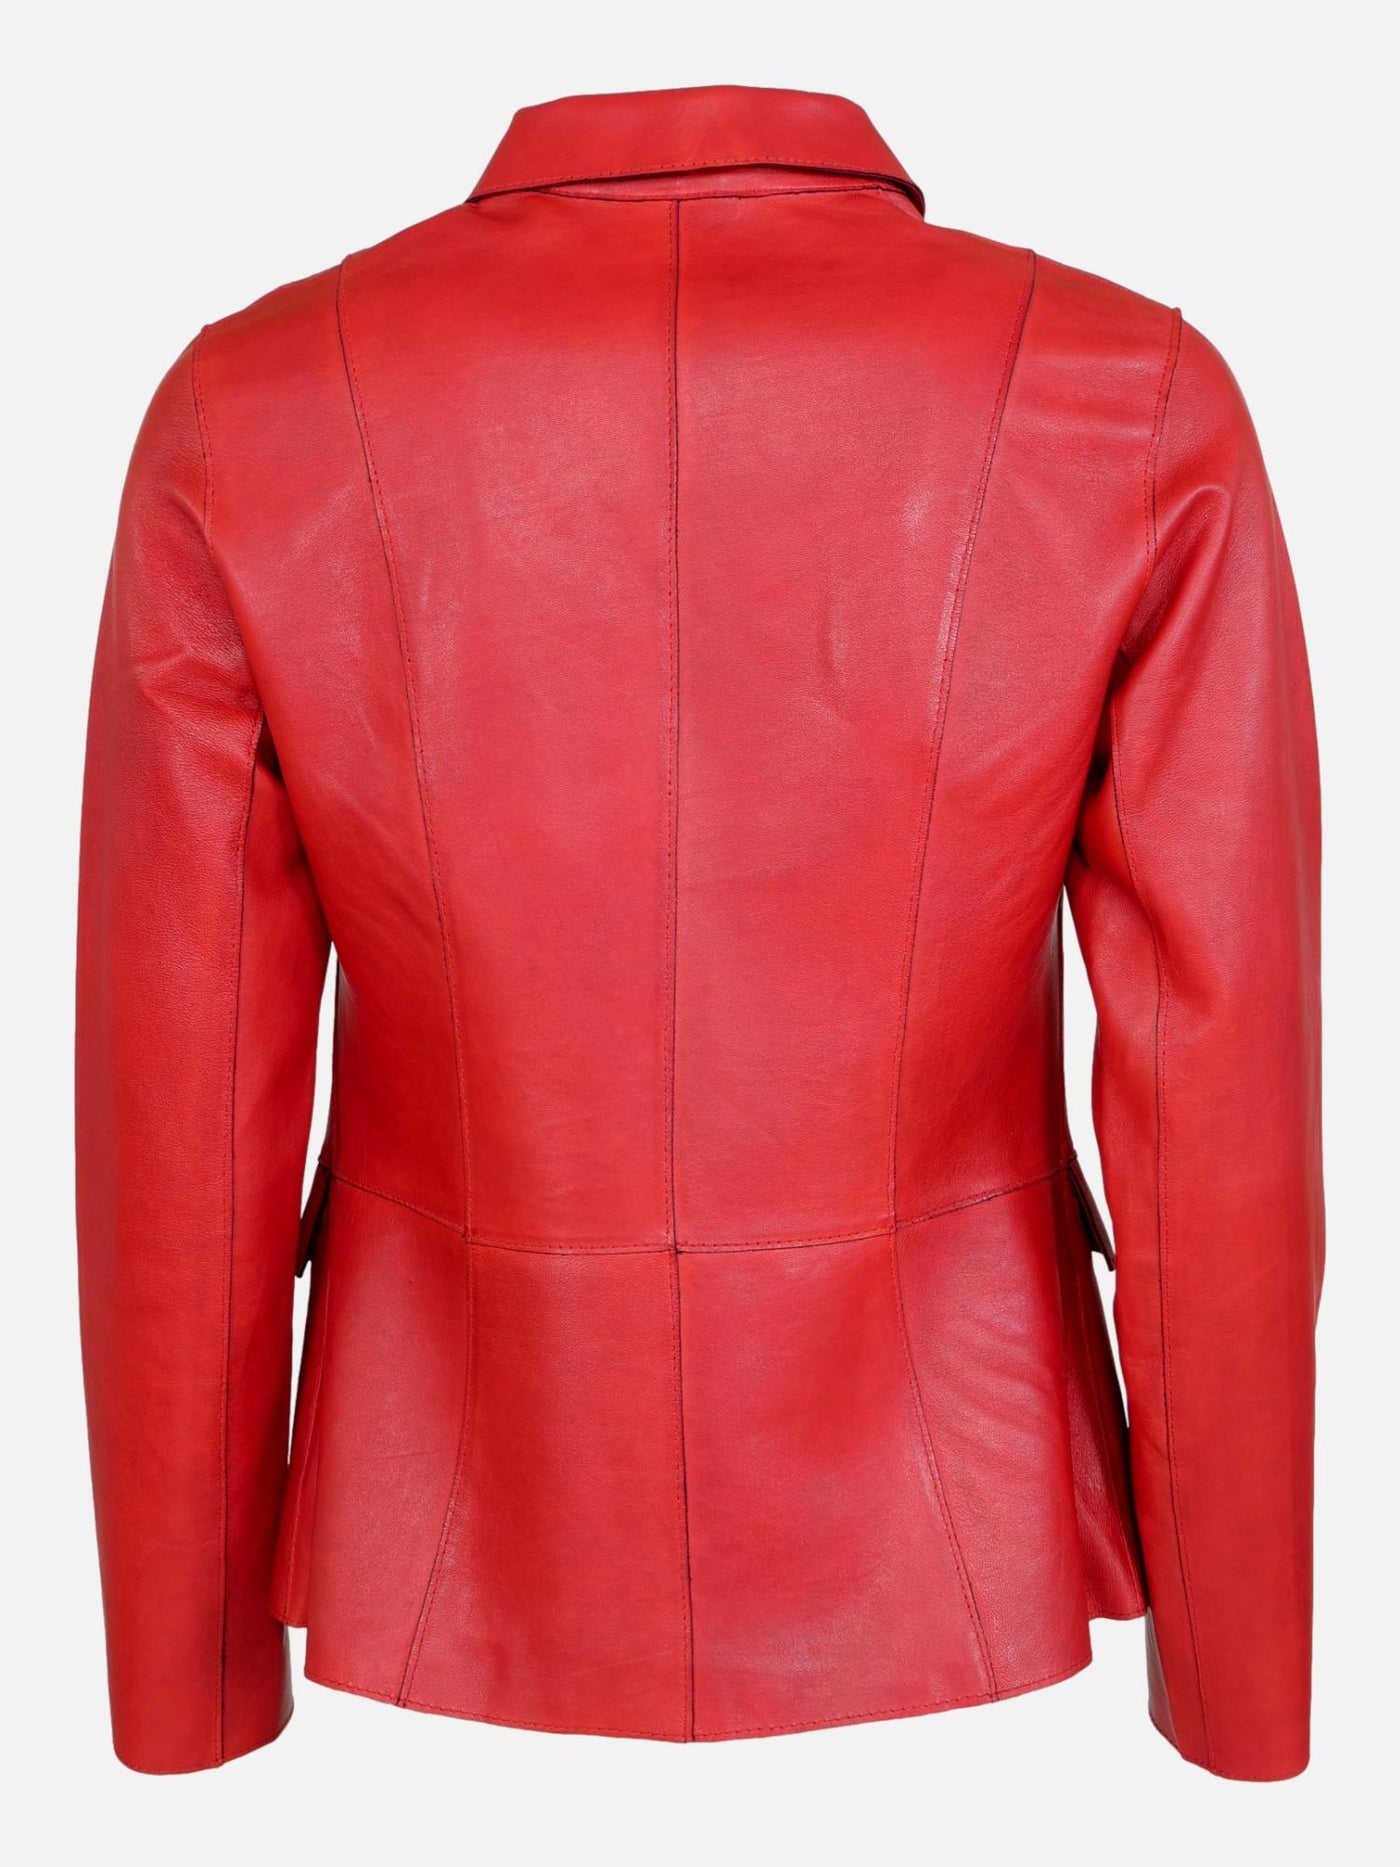 Lysaine - Leather & Farbric - Women - Fire Red